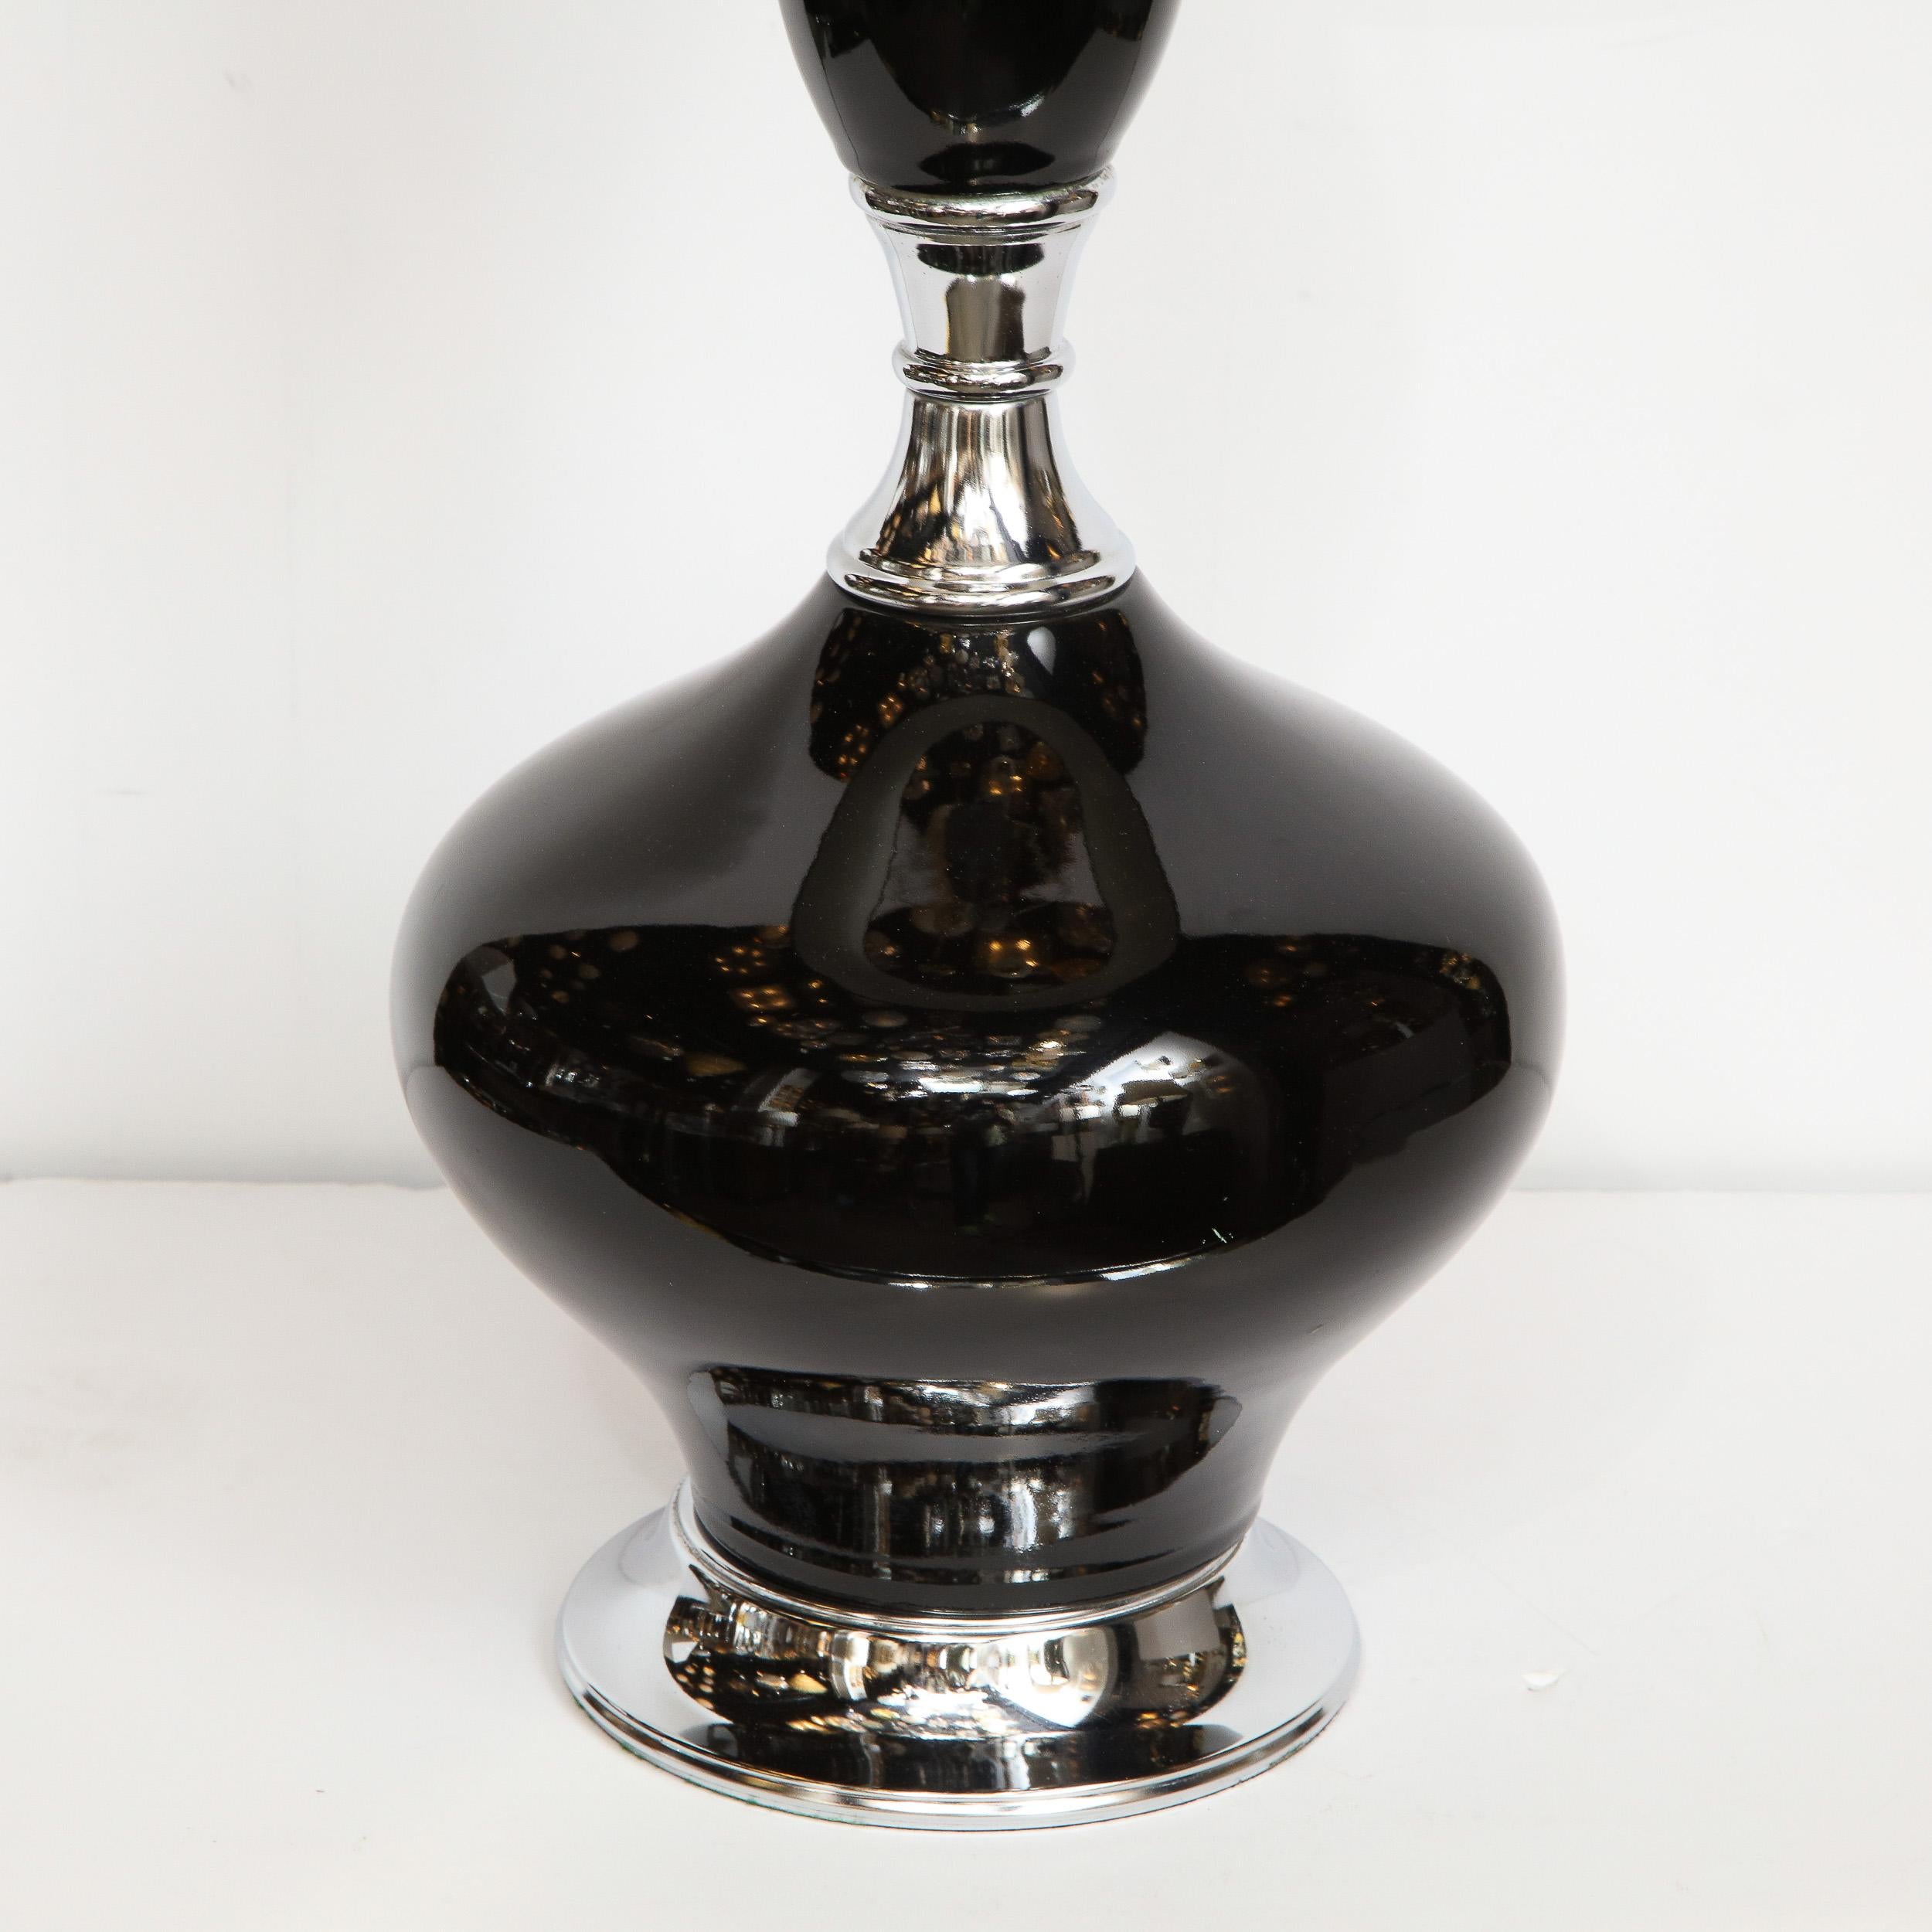 American Mid-Century Modern Sculptural Black Glazed Ceramic Lamp with Chrome Base For Sale